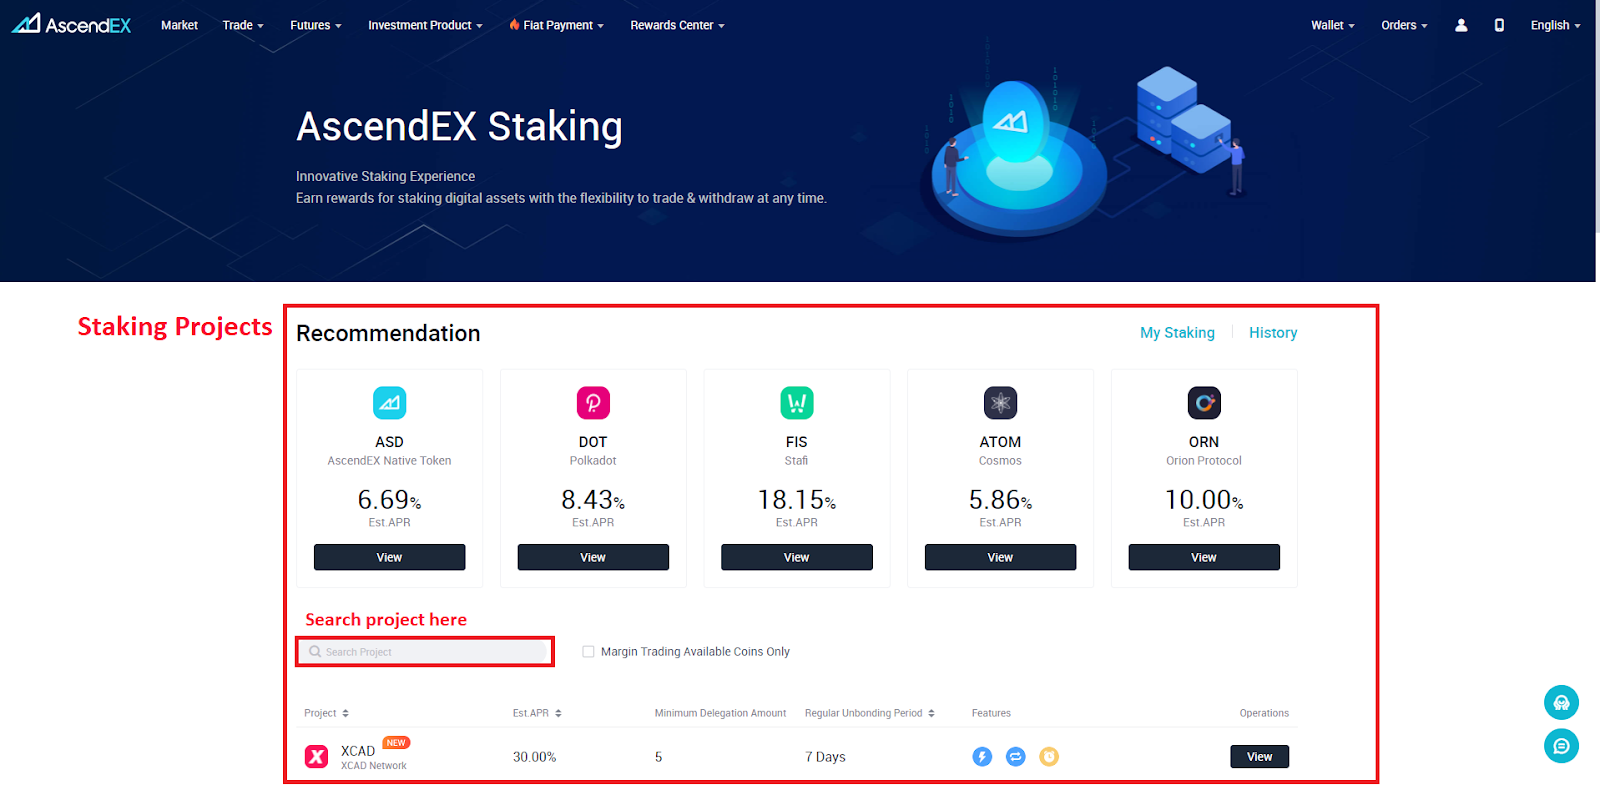 A Guide to AscendEx Staking [2021] | CoinCodeCap